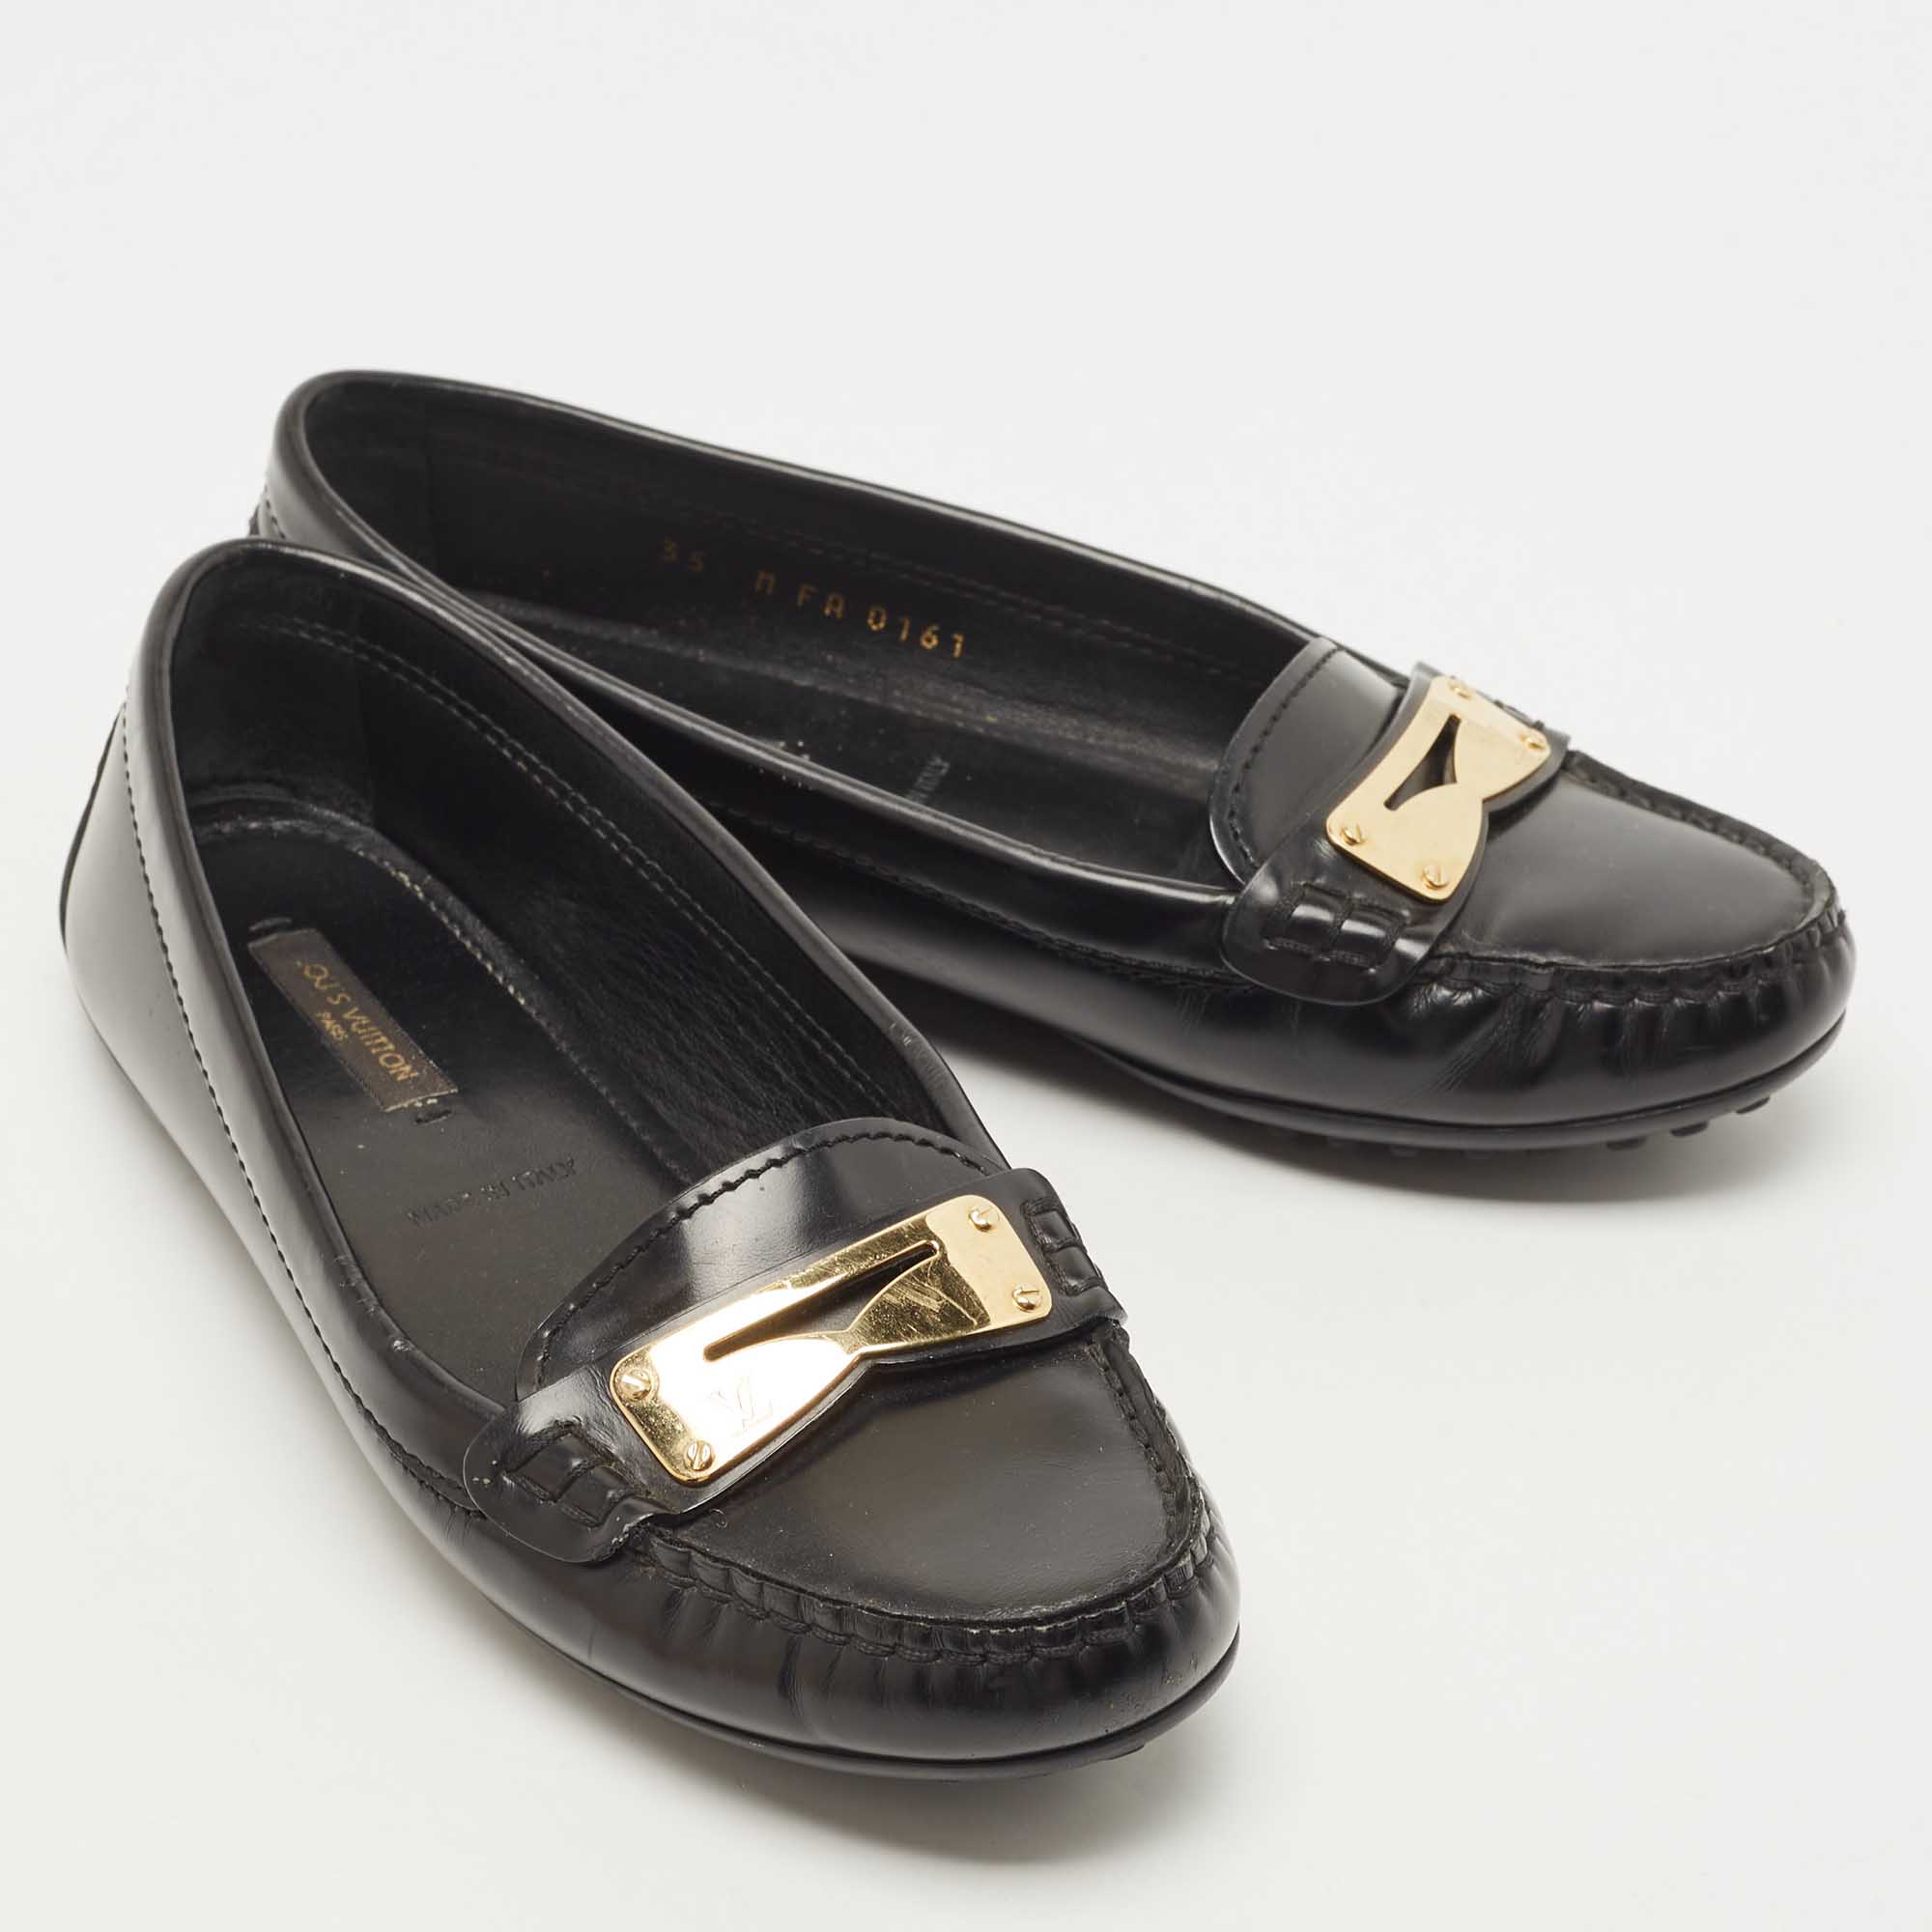 Louis Vuitton Black Leather Penny Slip Loafers Size 35